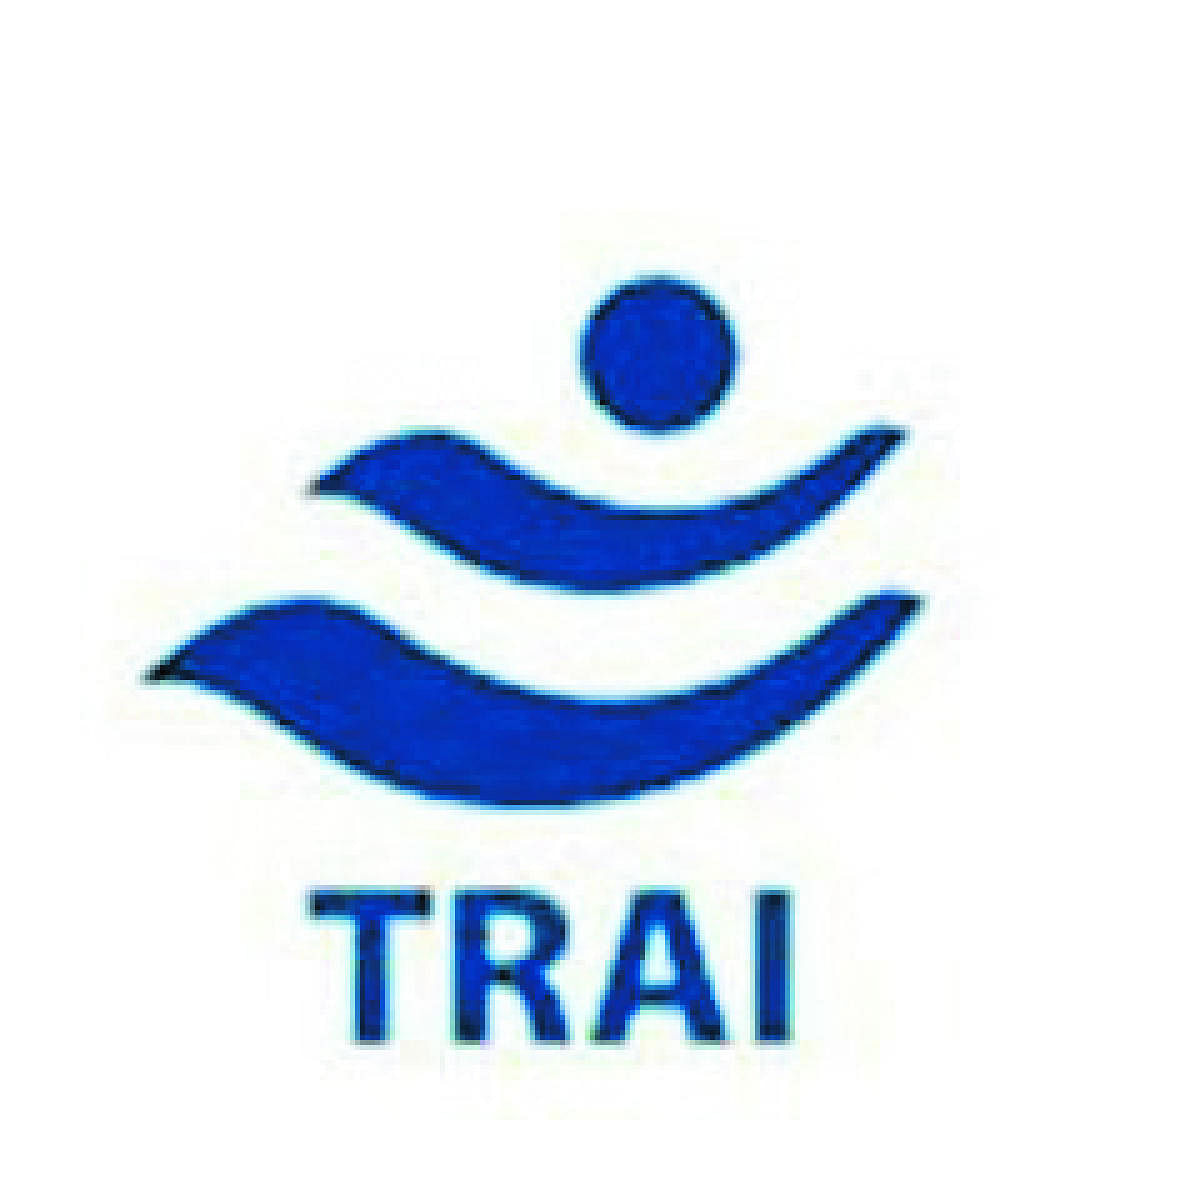 TRAI calls for public opinion on interconnect usage charges.